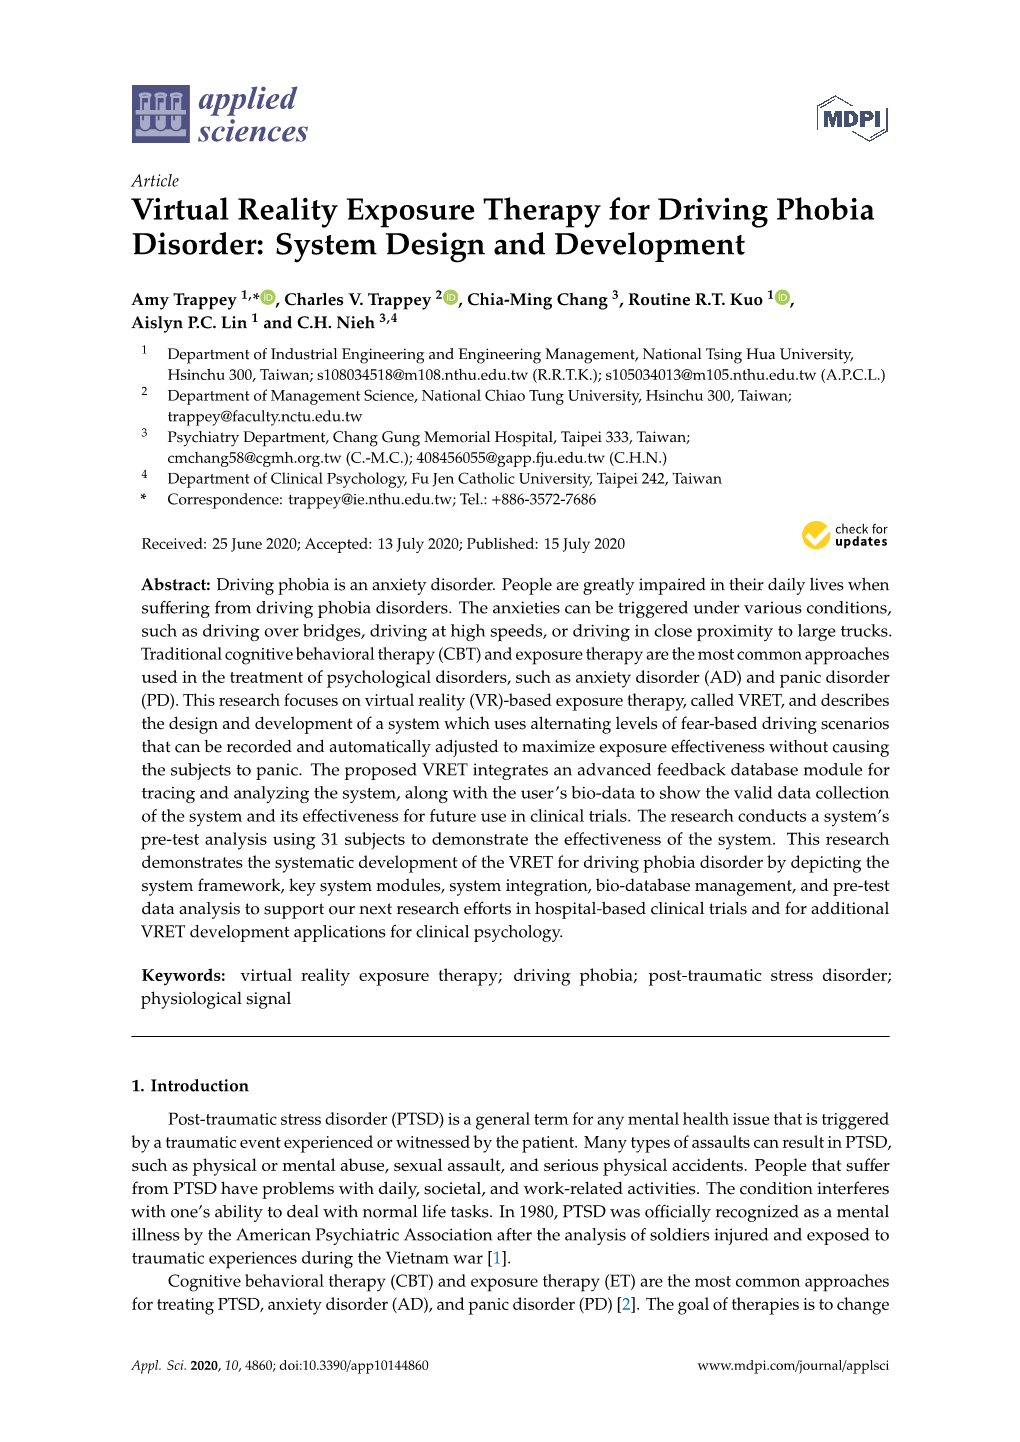 Virtual Reality Exposure Therapy for Driving Phobia Disorder: System Design and Development